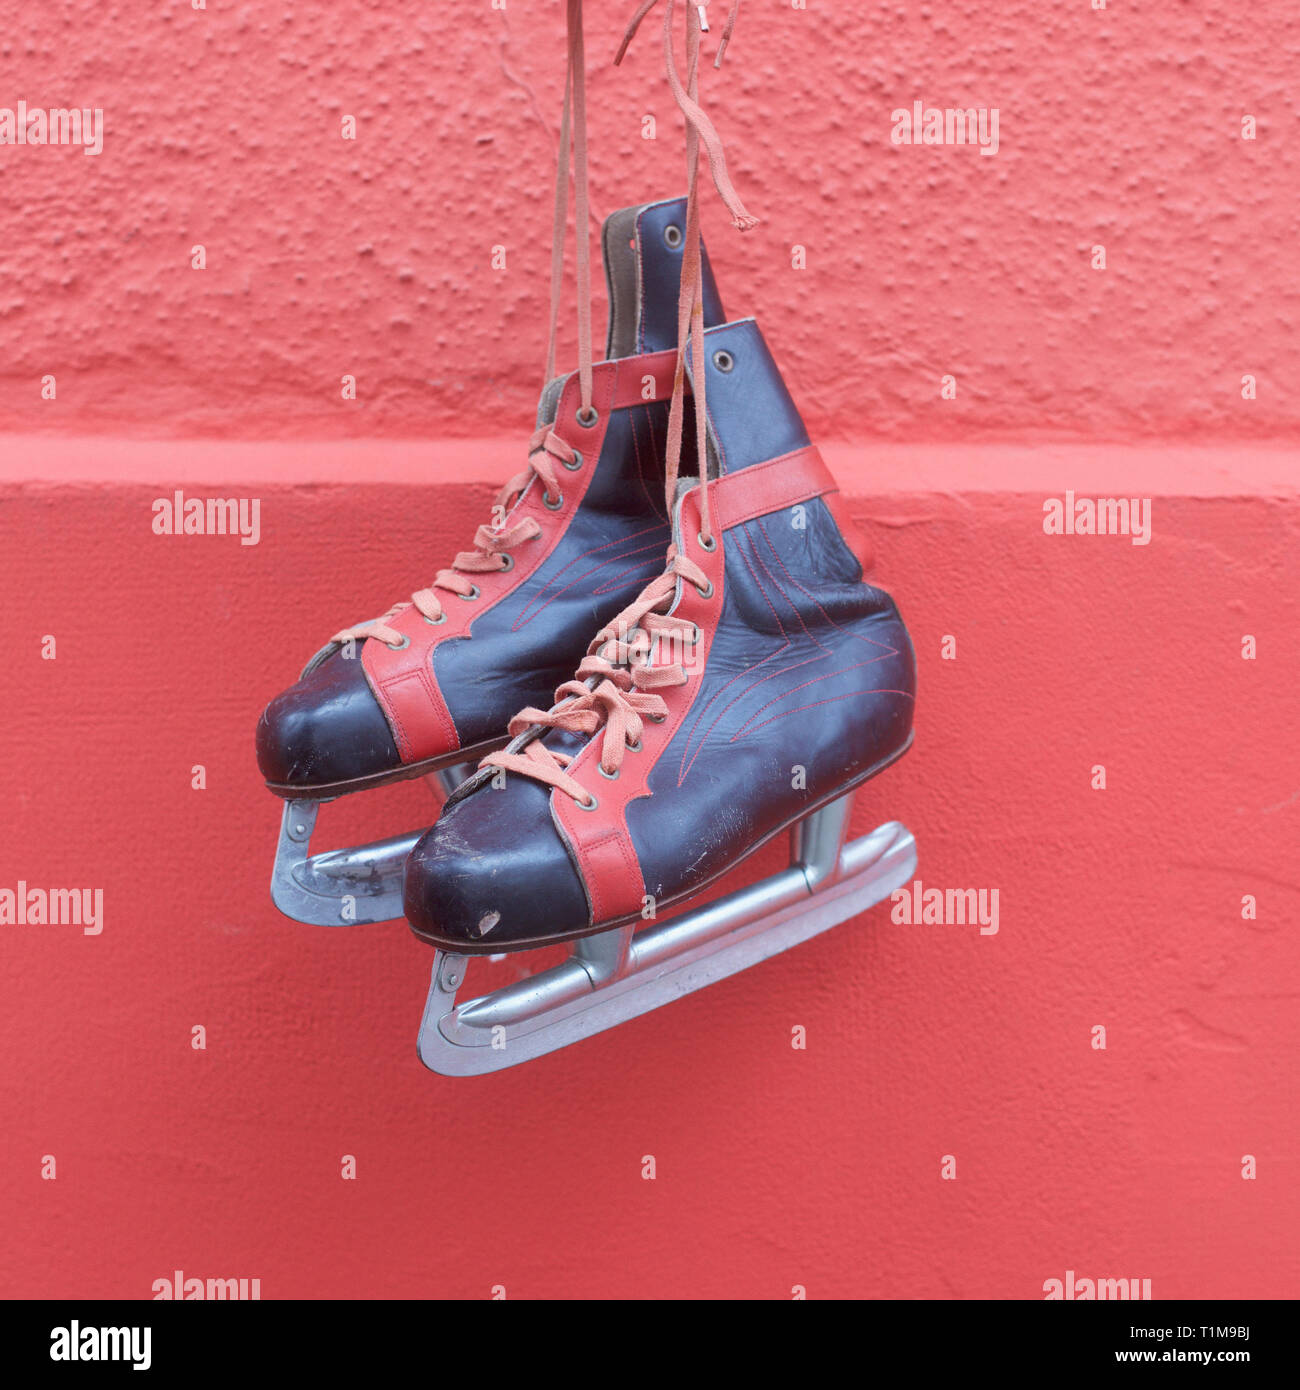 Ice skates hanging against red wall Stock Photo